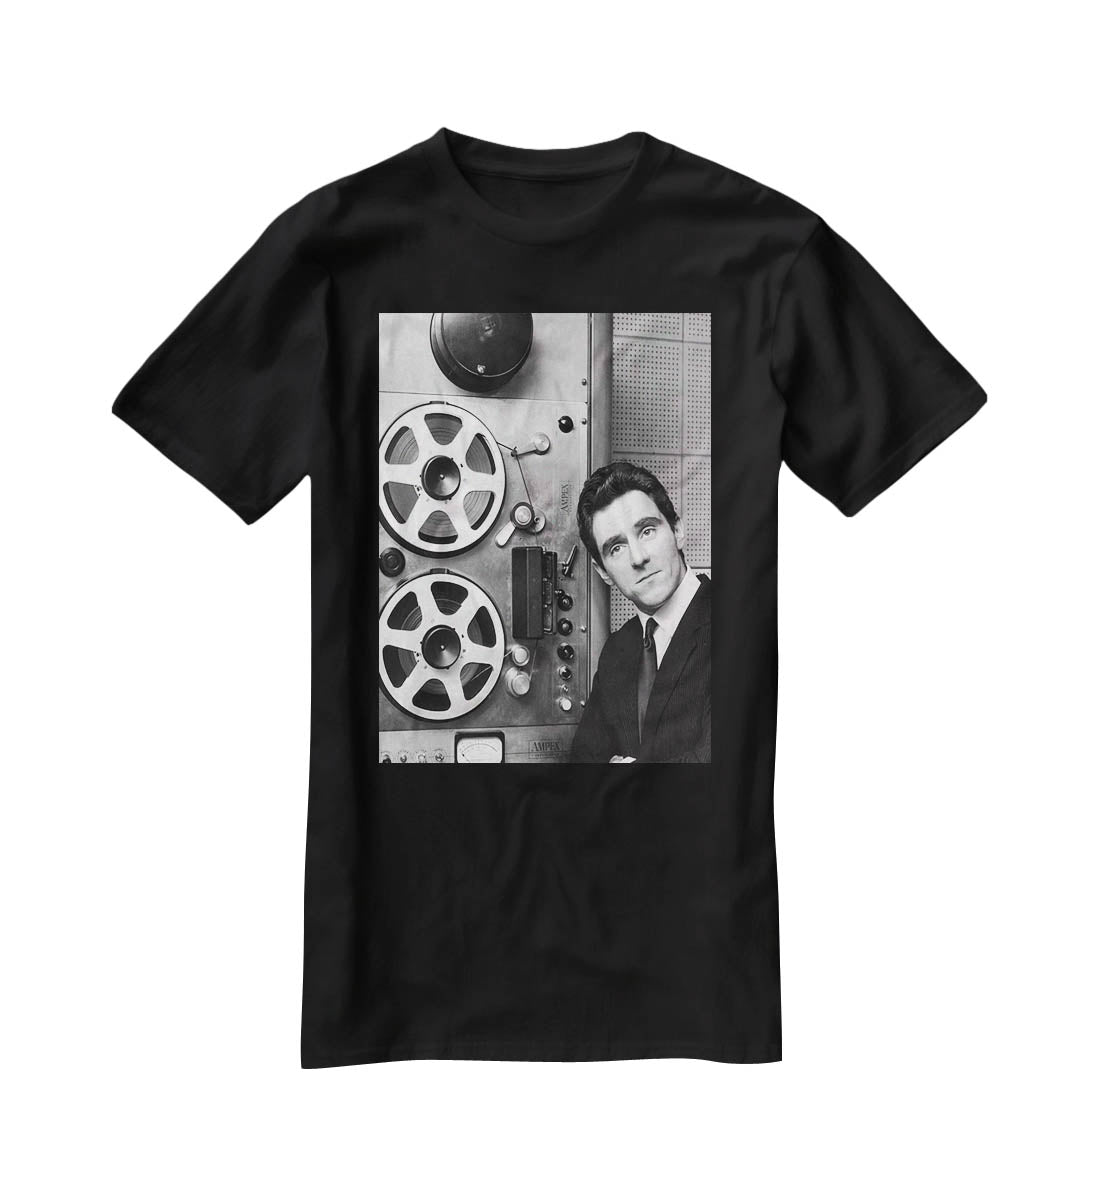 Anthony Newley in the recording studio T-Shirt - Canvas Art Rocks - 1